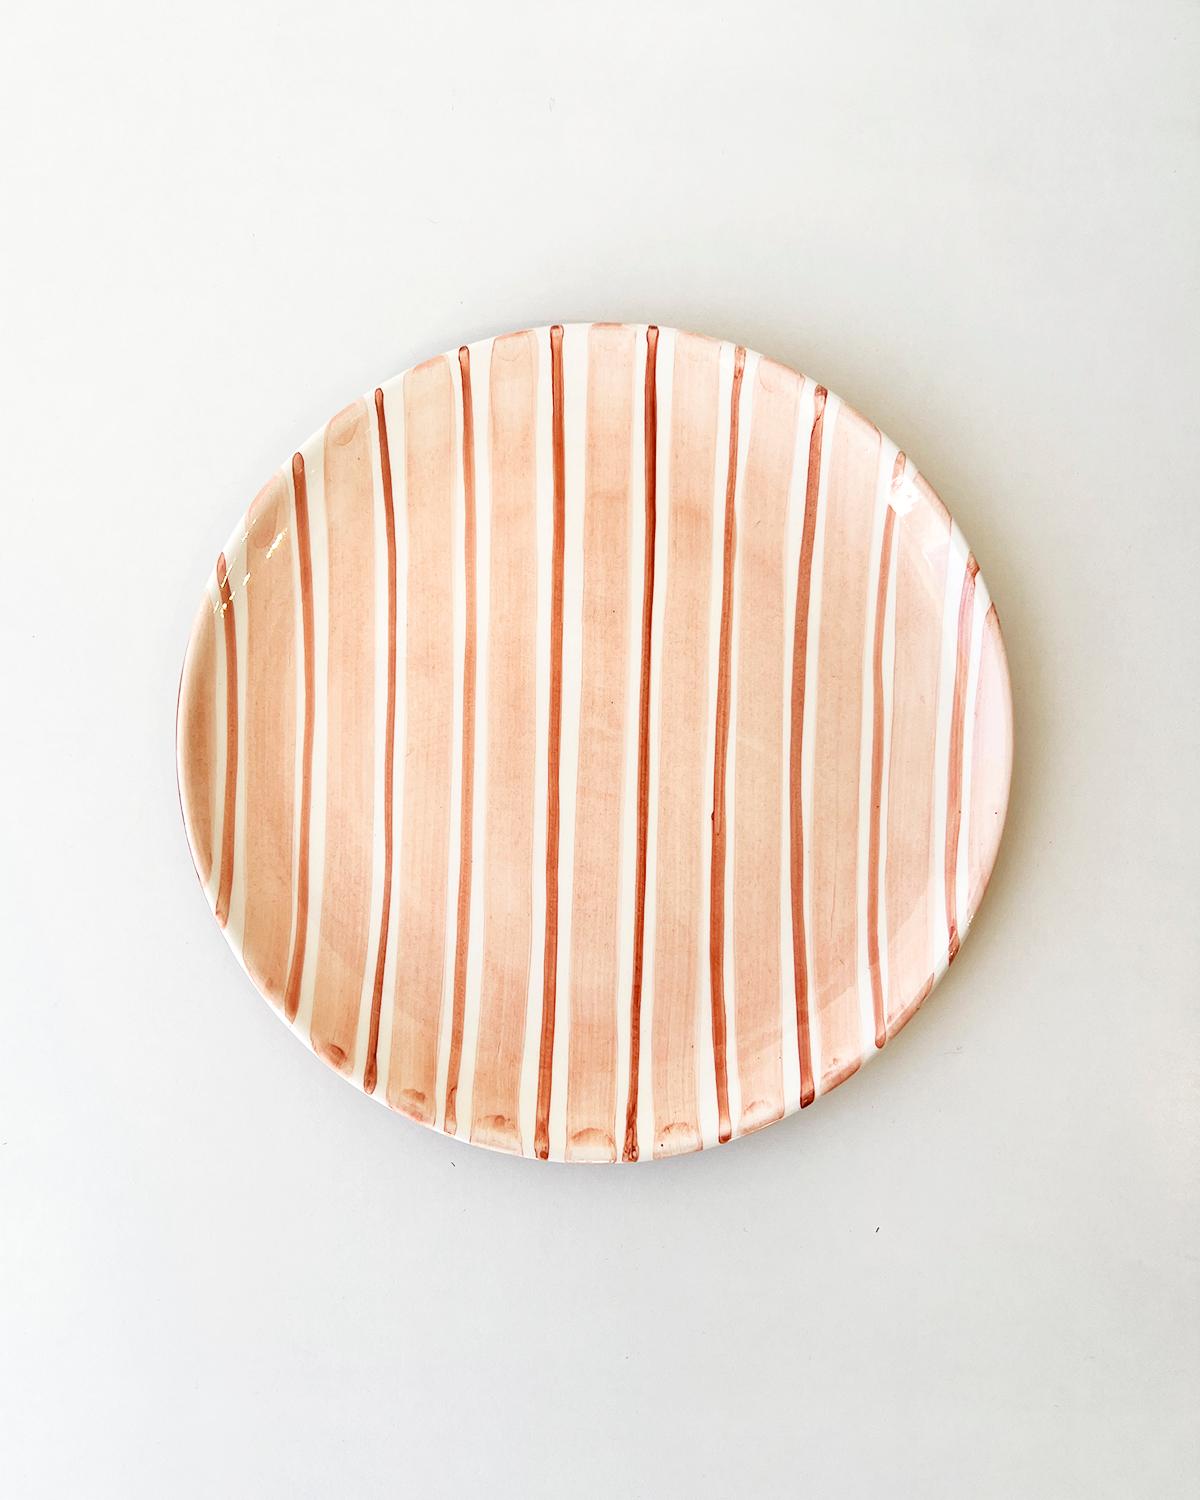 Casa Cubista Cabana Pink Striped Terracotta Dinnerware Bowls In New Condition For Sale In West Hollywood, CA